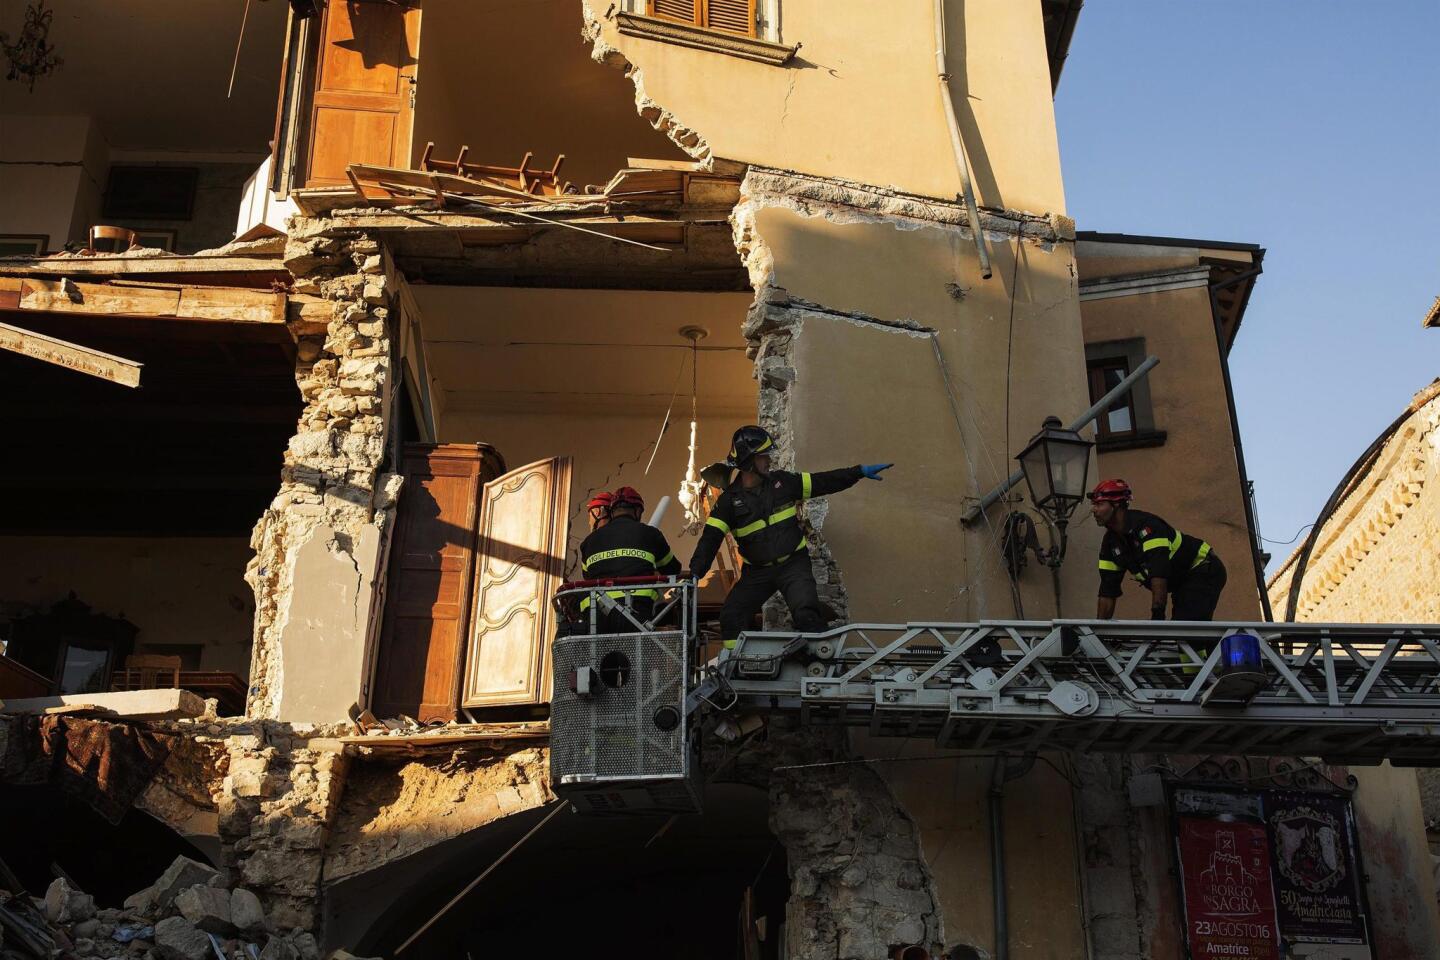 Rescue workers dig through the rubble Aug. 27, 2016, in the earthquake-stricken town of Amatrice, Italy, three days after the devastating quake.